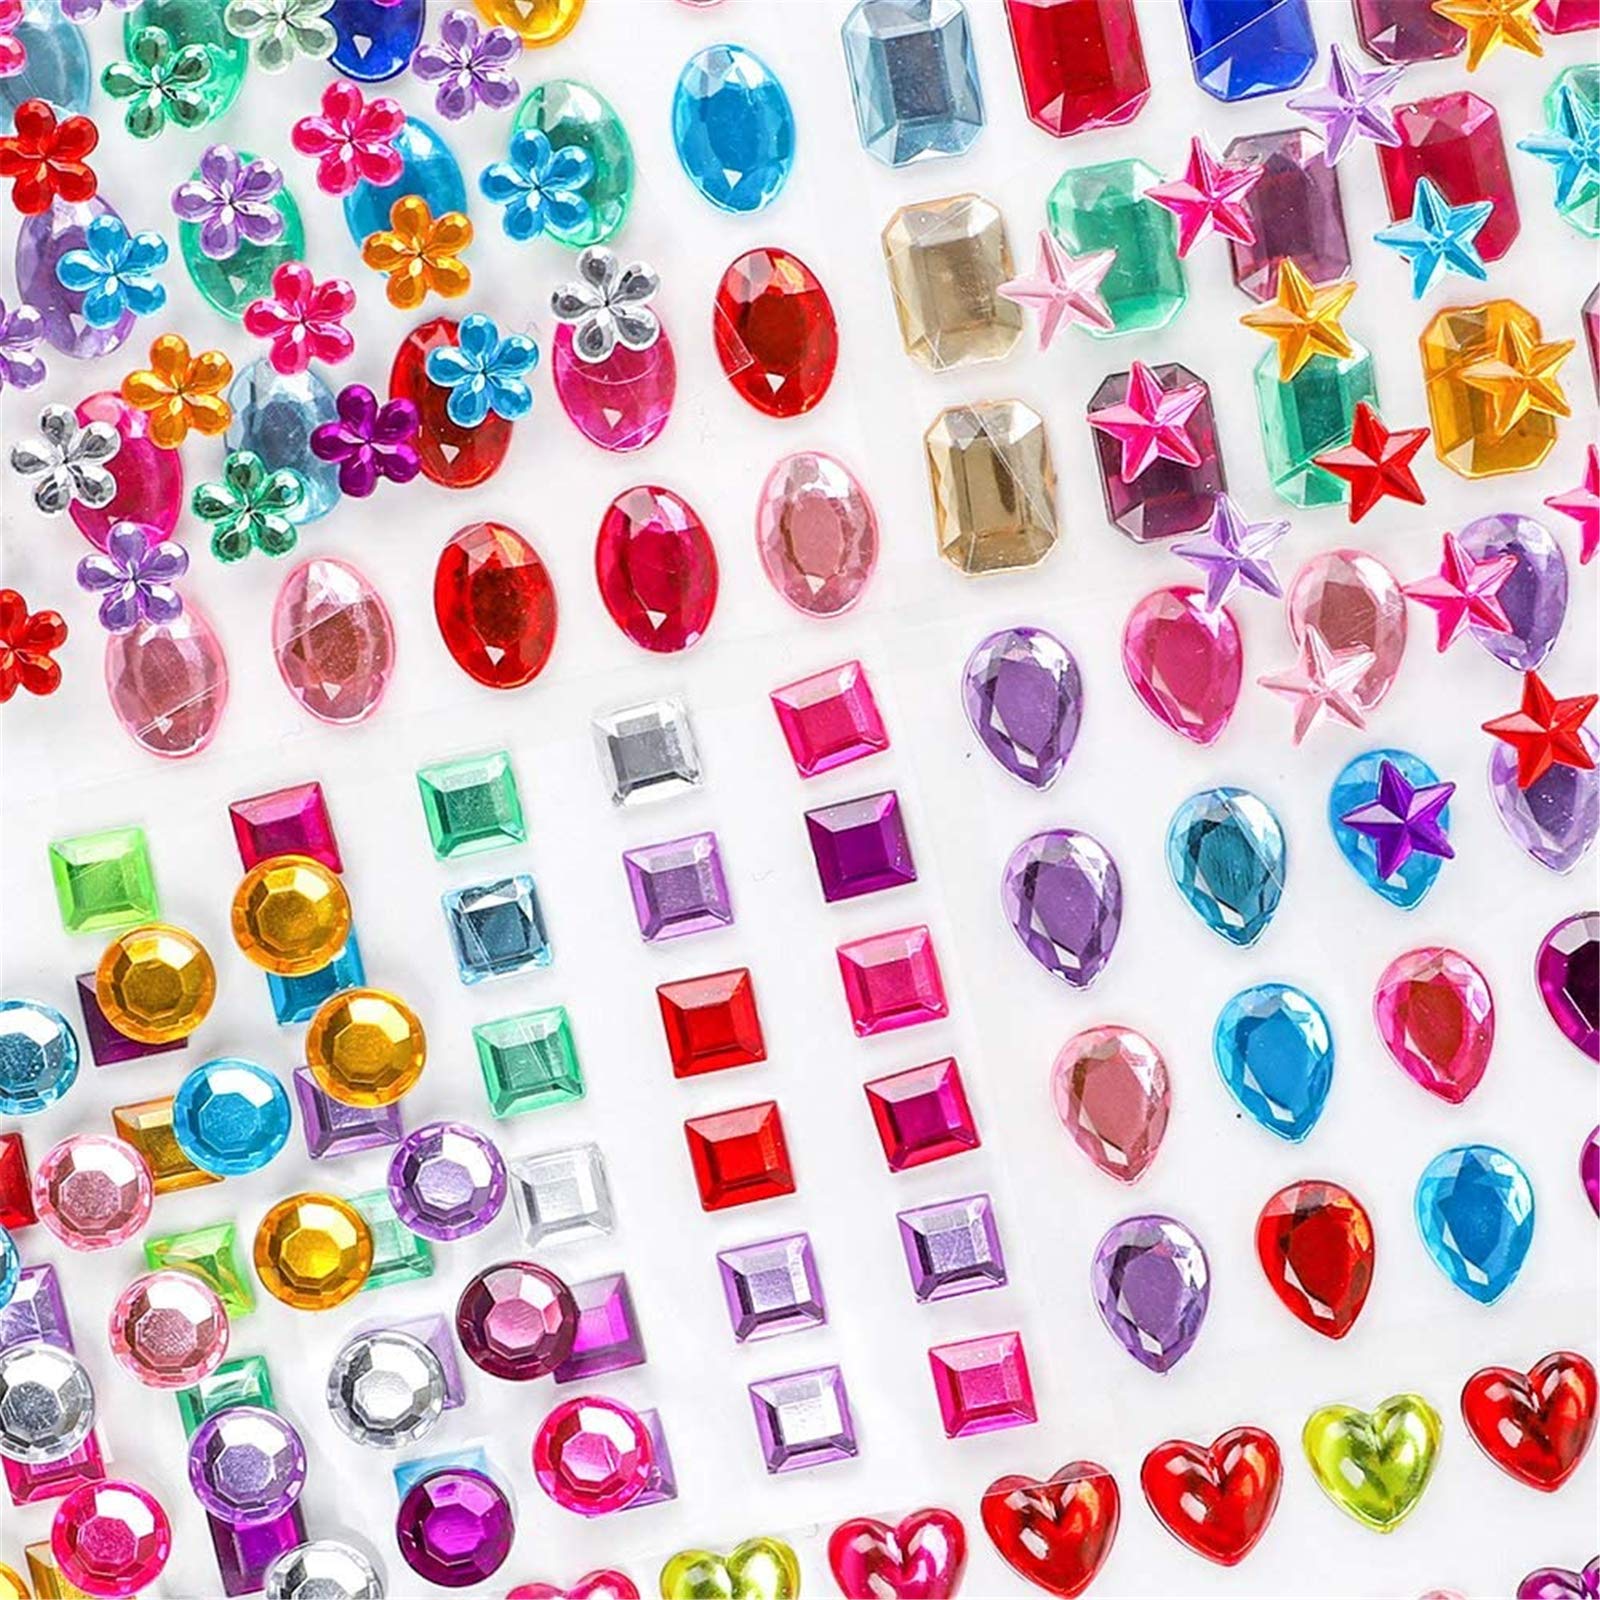 2200+Gem Stickers Jewels Stickers Rhinestone for Crafts Sticker Crystal Stickers Self Adhesive Craft Jewels for Arts & Crafts,Multicolor,Assorted